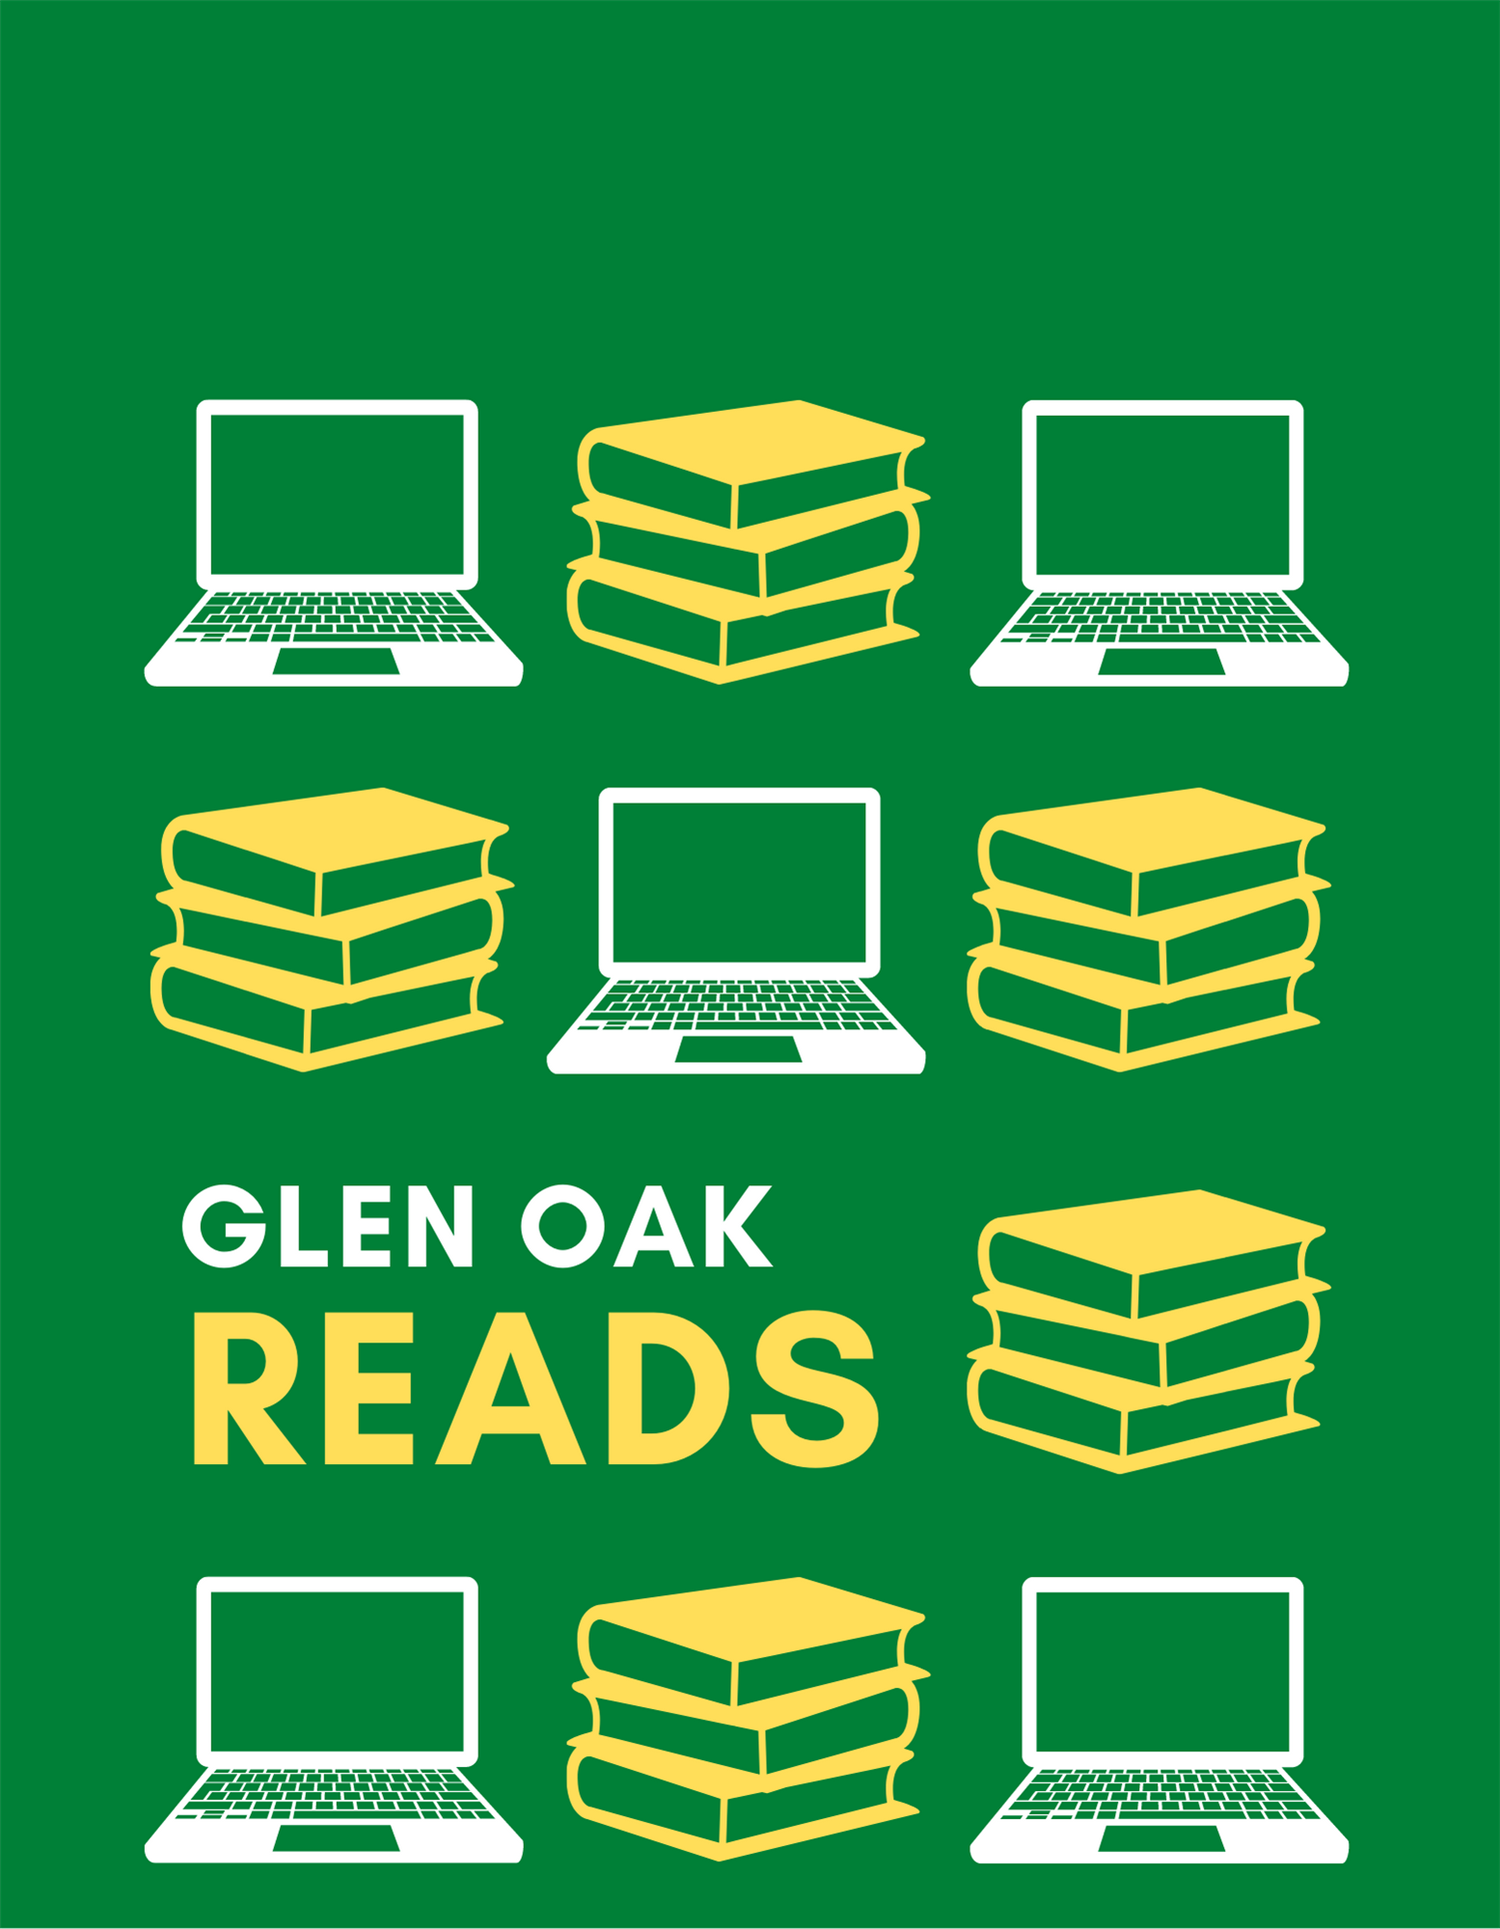 "glen oak reads" with cartoon drawings of computer and books